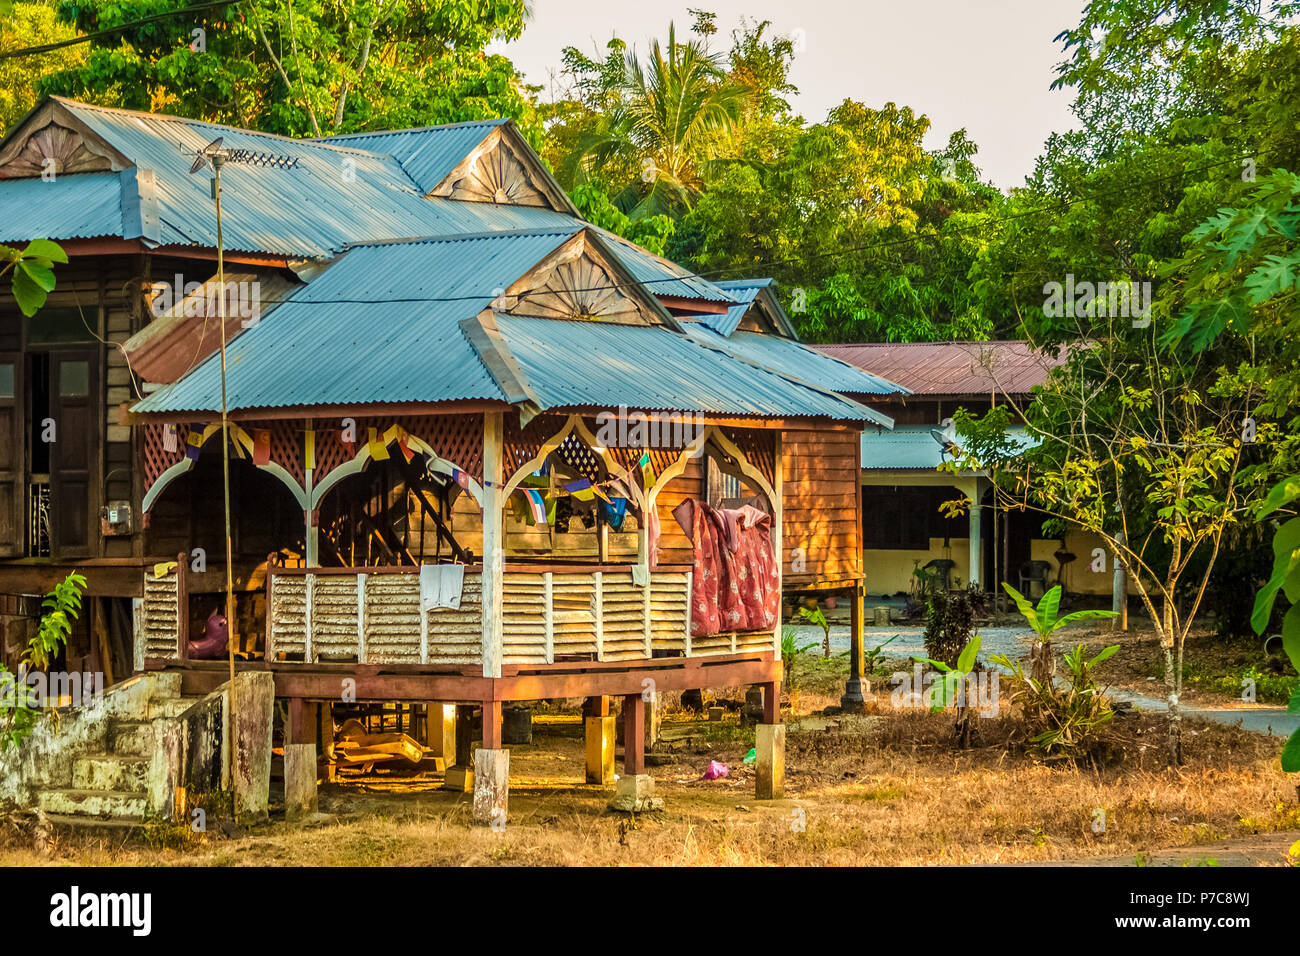 A traditional wooden Malay house on stilts with a tropically-suited roof, clothes drying on a clothesline; home of local residents on Langkawi Island... Stock Photo